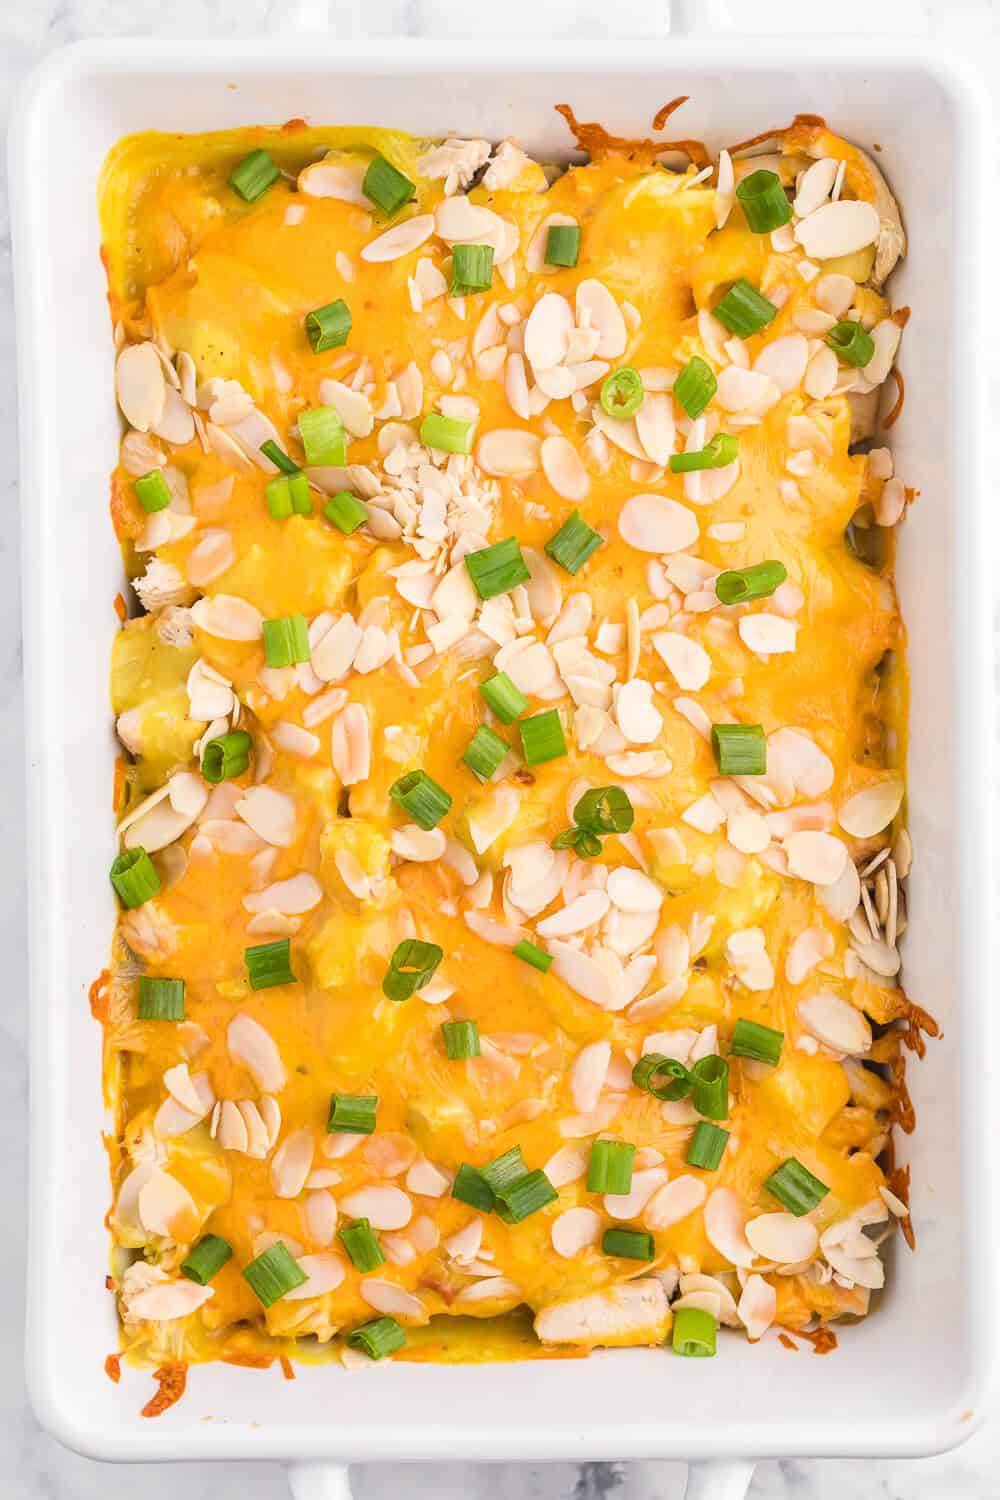 Chicken Asparagus Bake - Easily one of my favourite casserole dishes! It's loaded with asparagus, chicken, creamy curry sauce and smothered in cheese and sliced almonds.